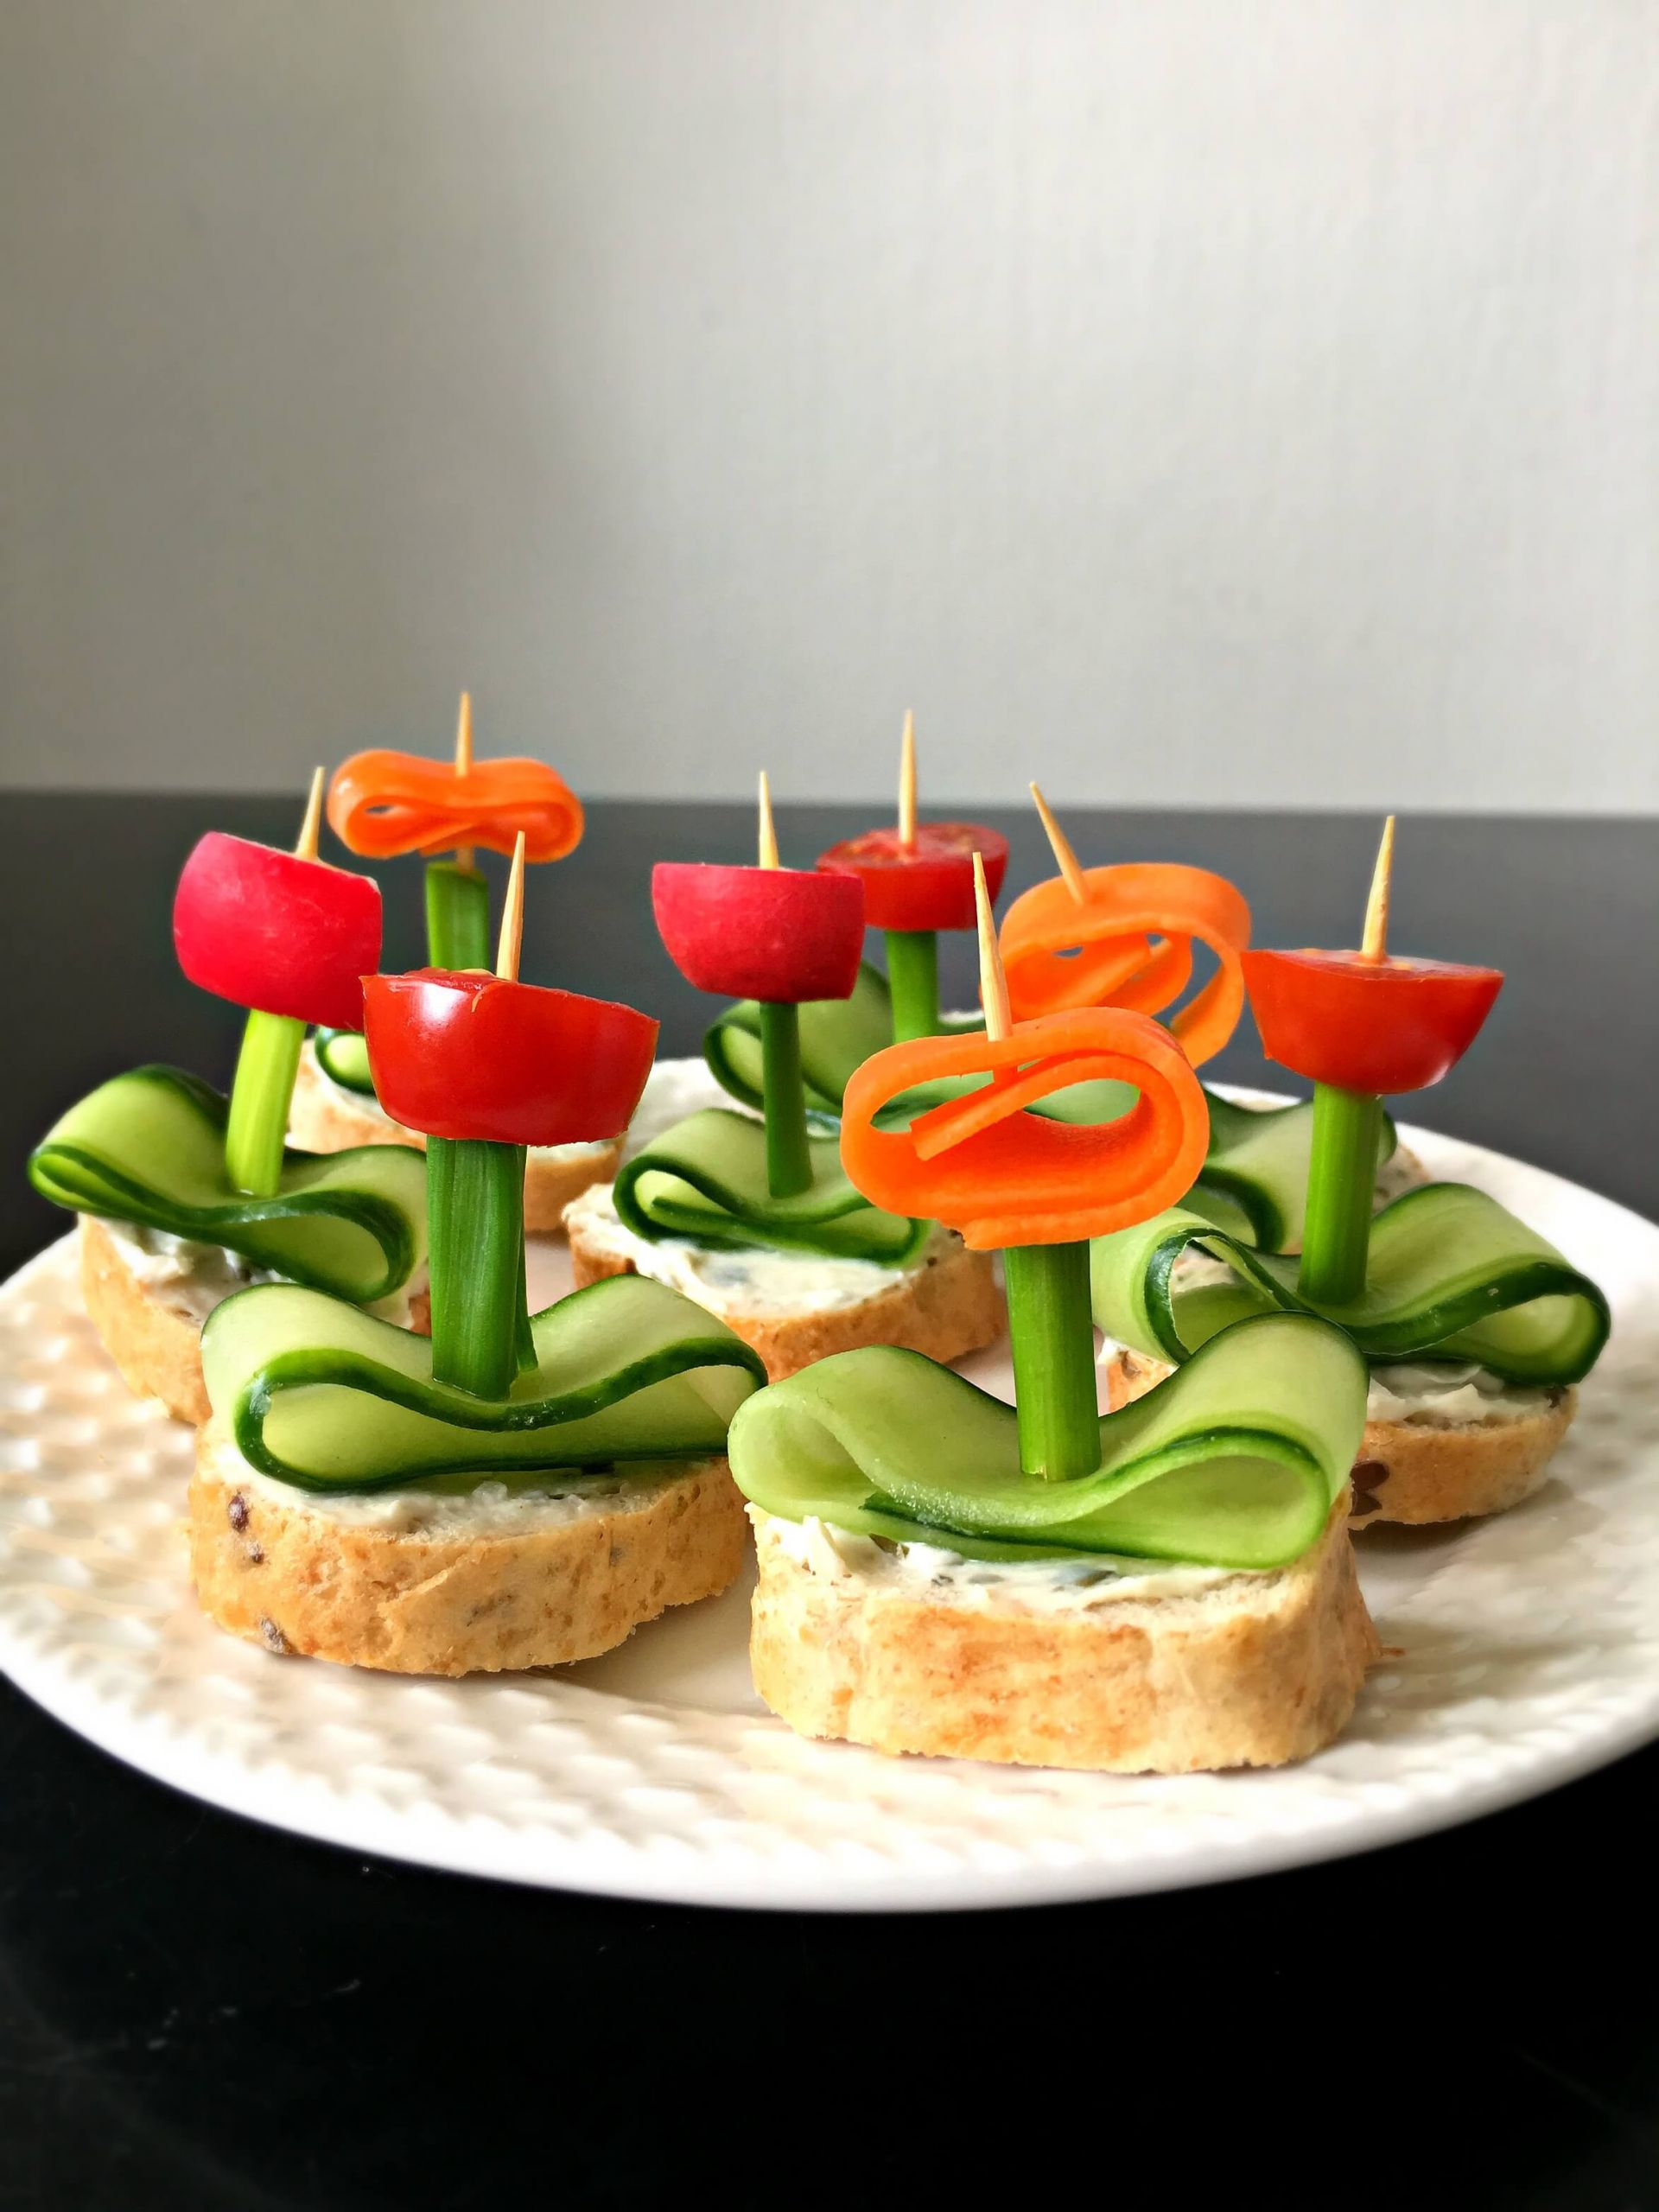 Easy Cream Cheese Appetizers
 Vegan Flower Appetizers with Herb "Cream Cheese"